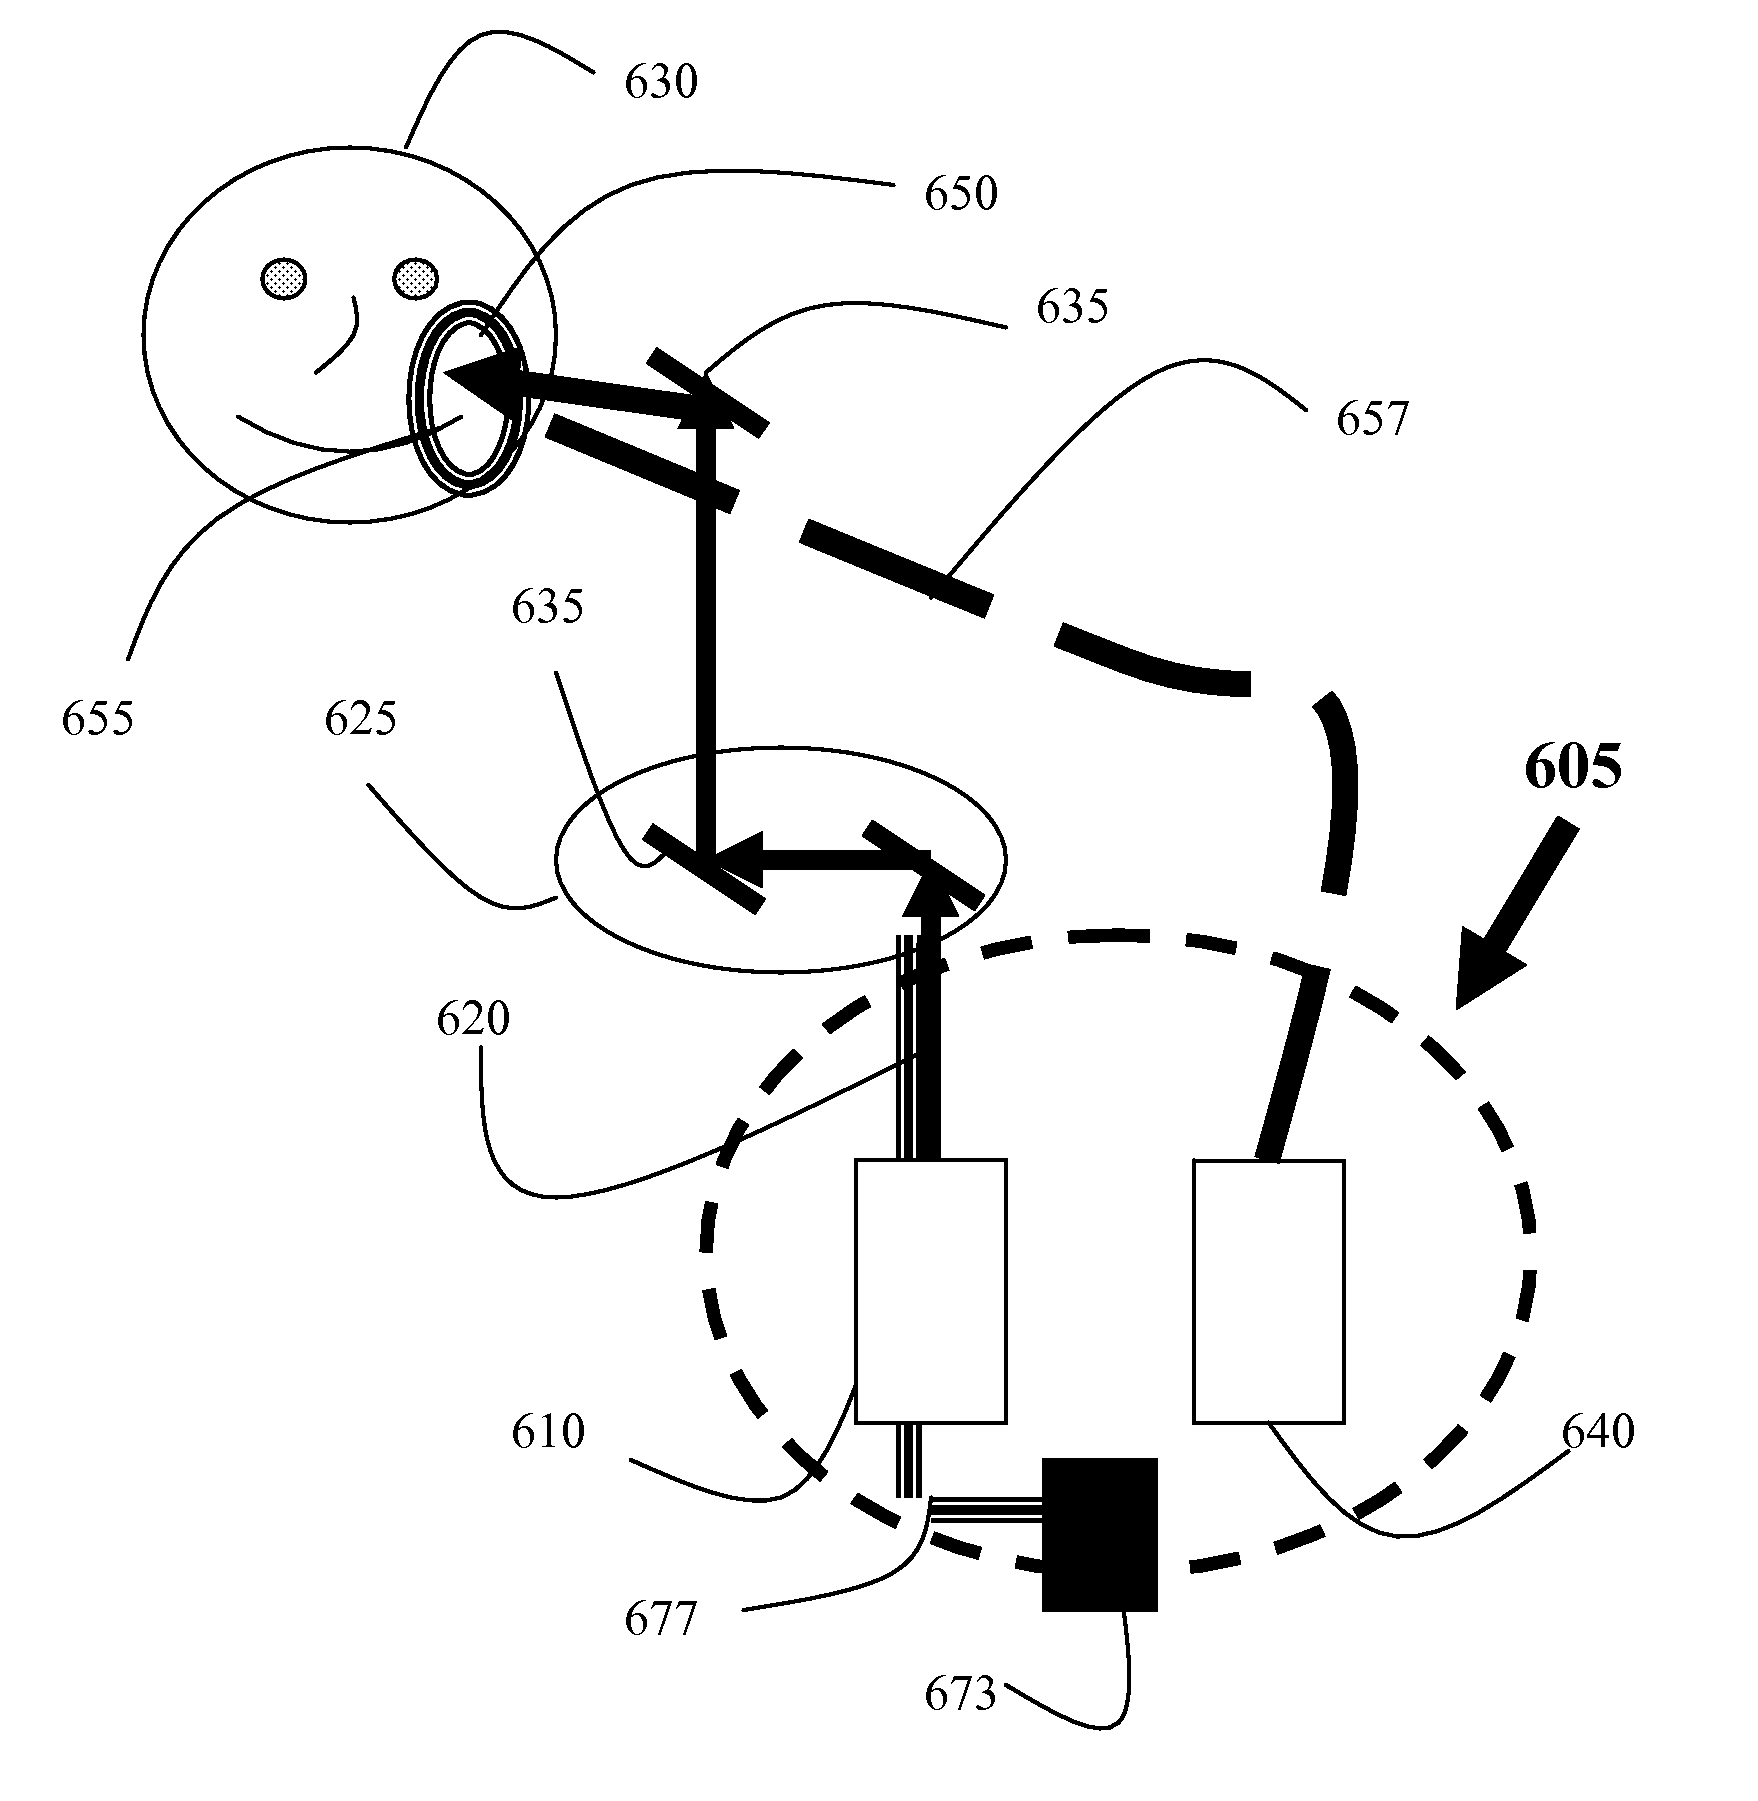 Home Use Device and Method for Treating Skin Conditions